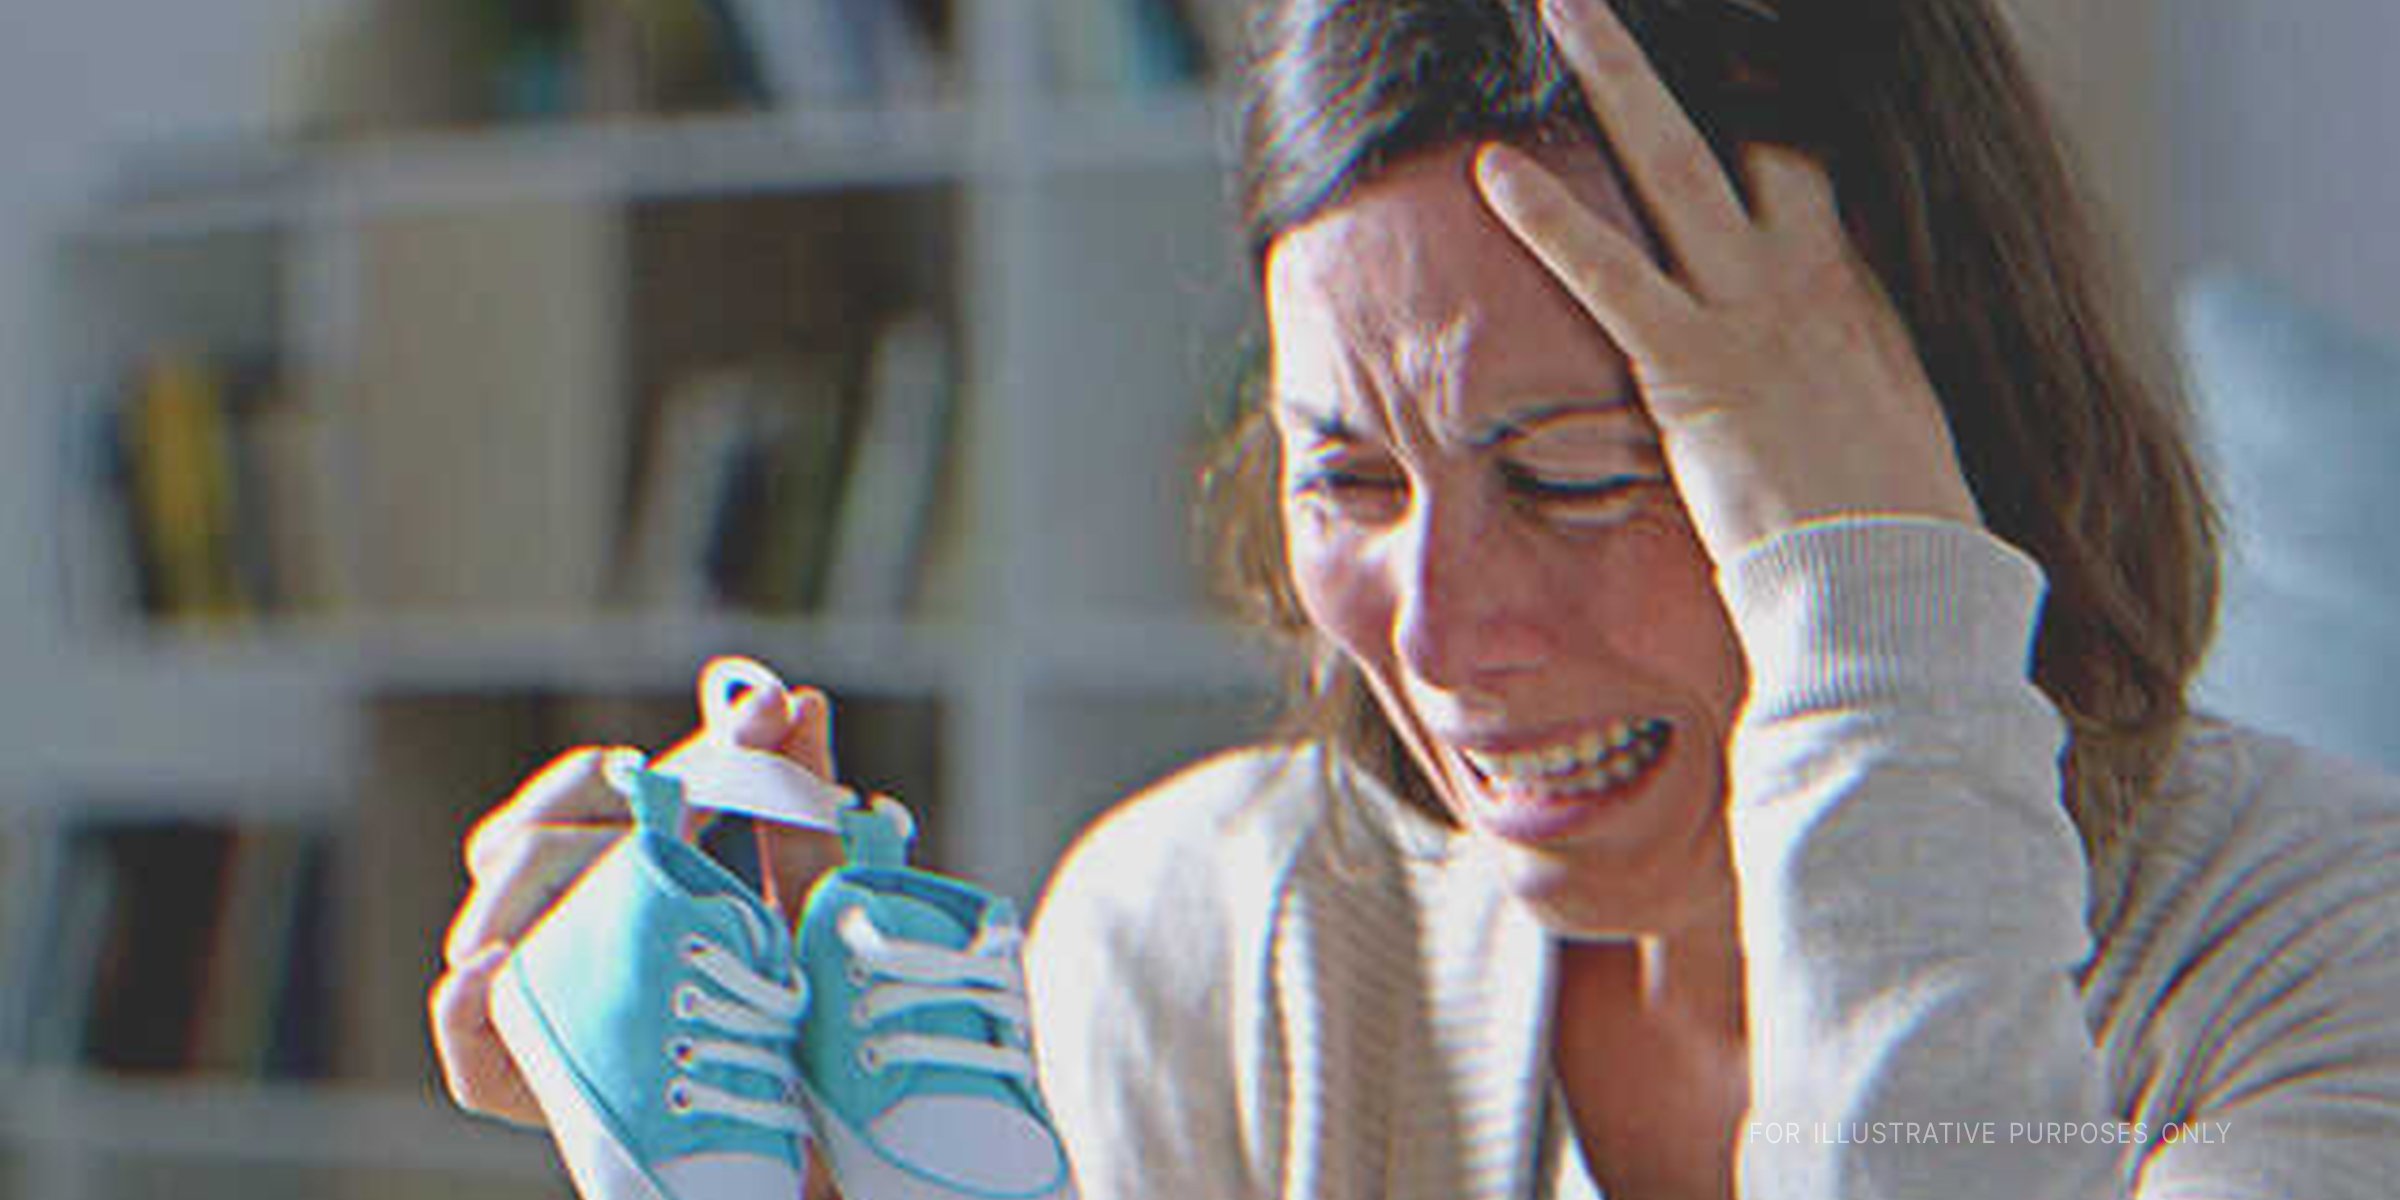 Grieving mother holding a pair of blue shoes | Source: Shutterstock